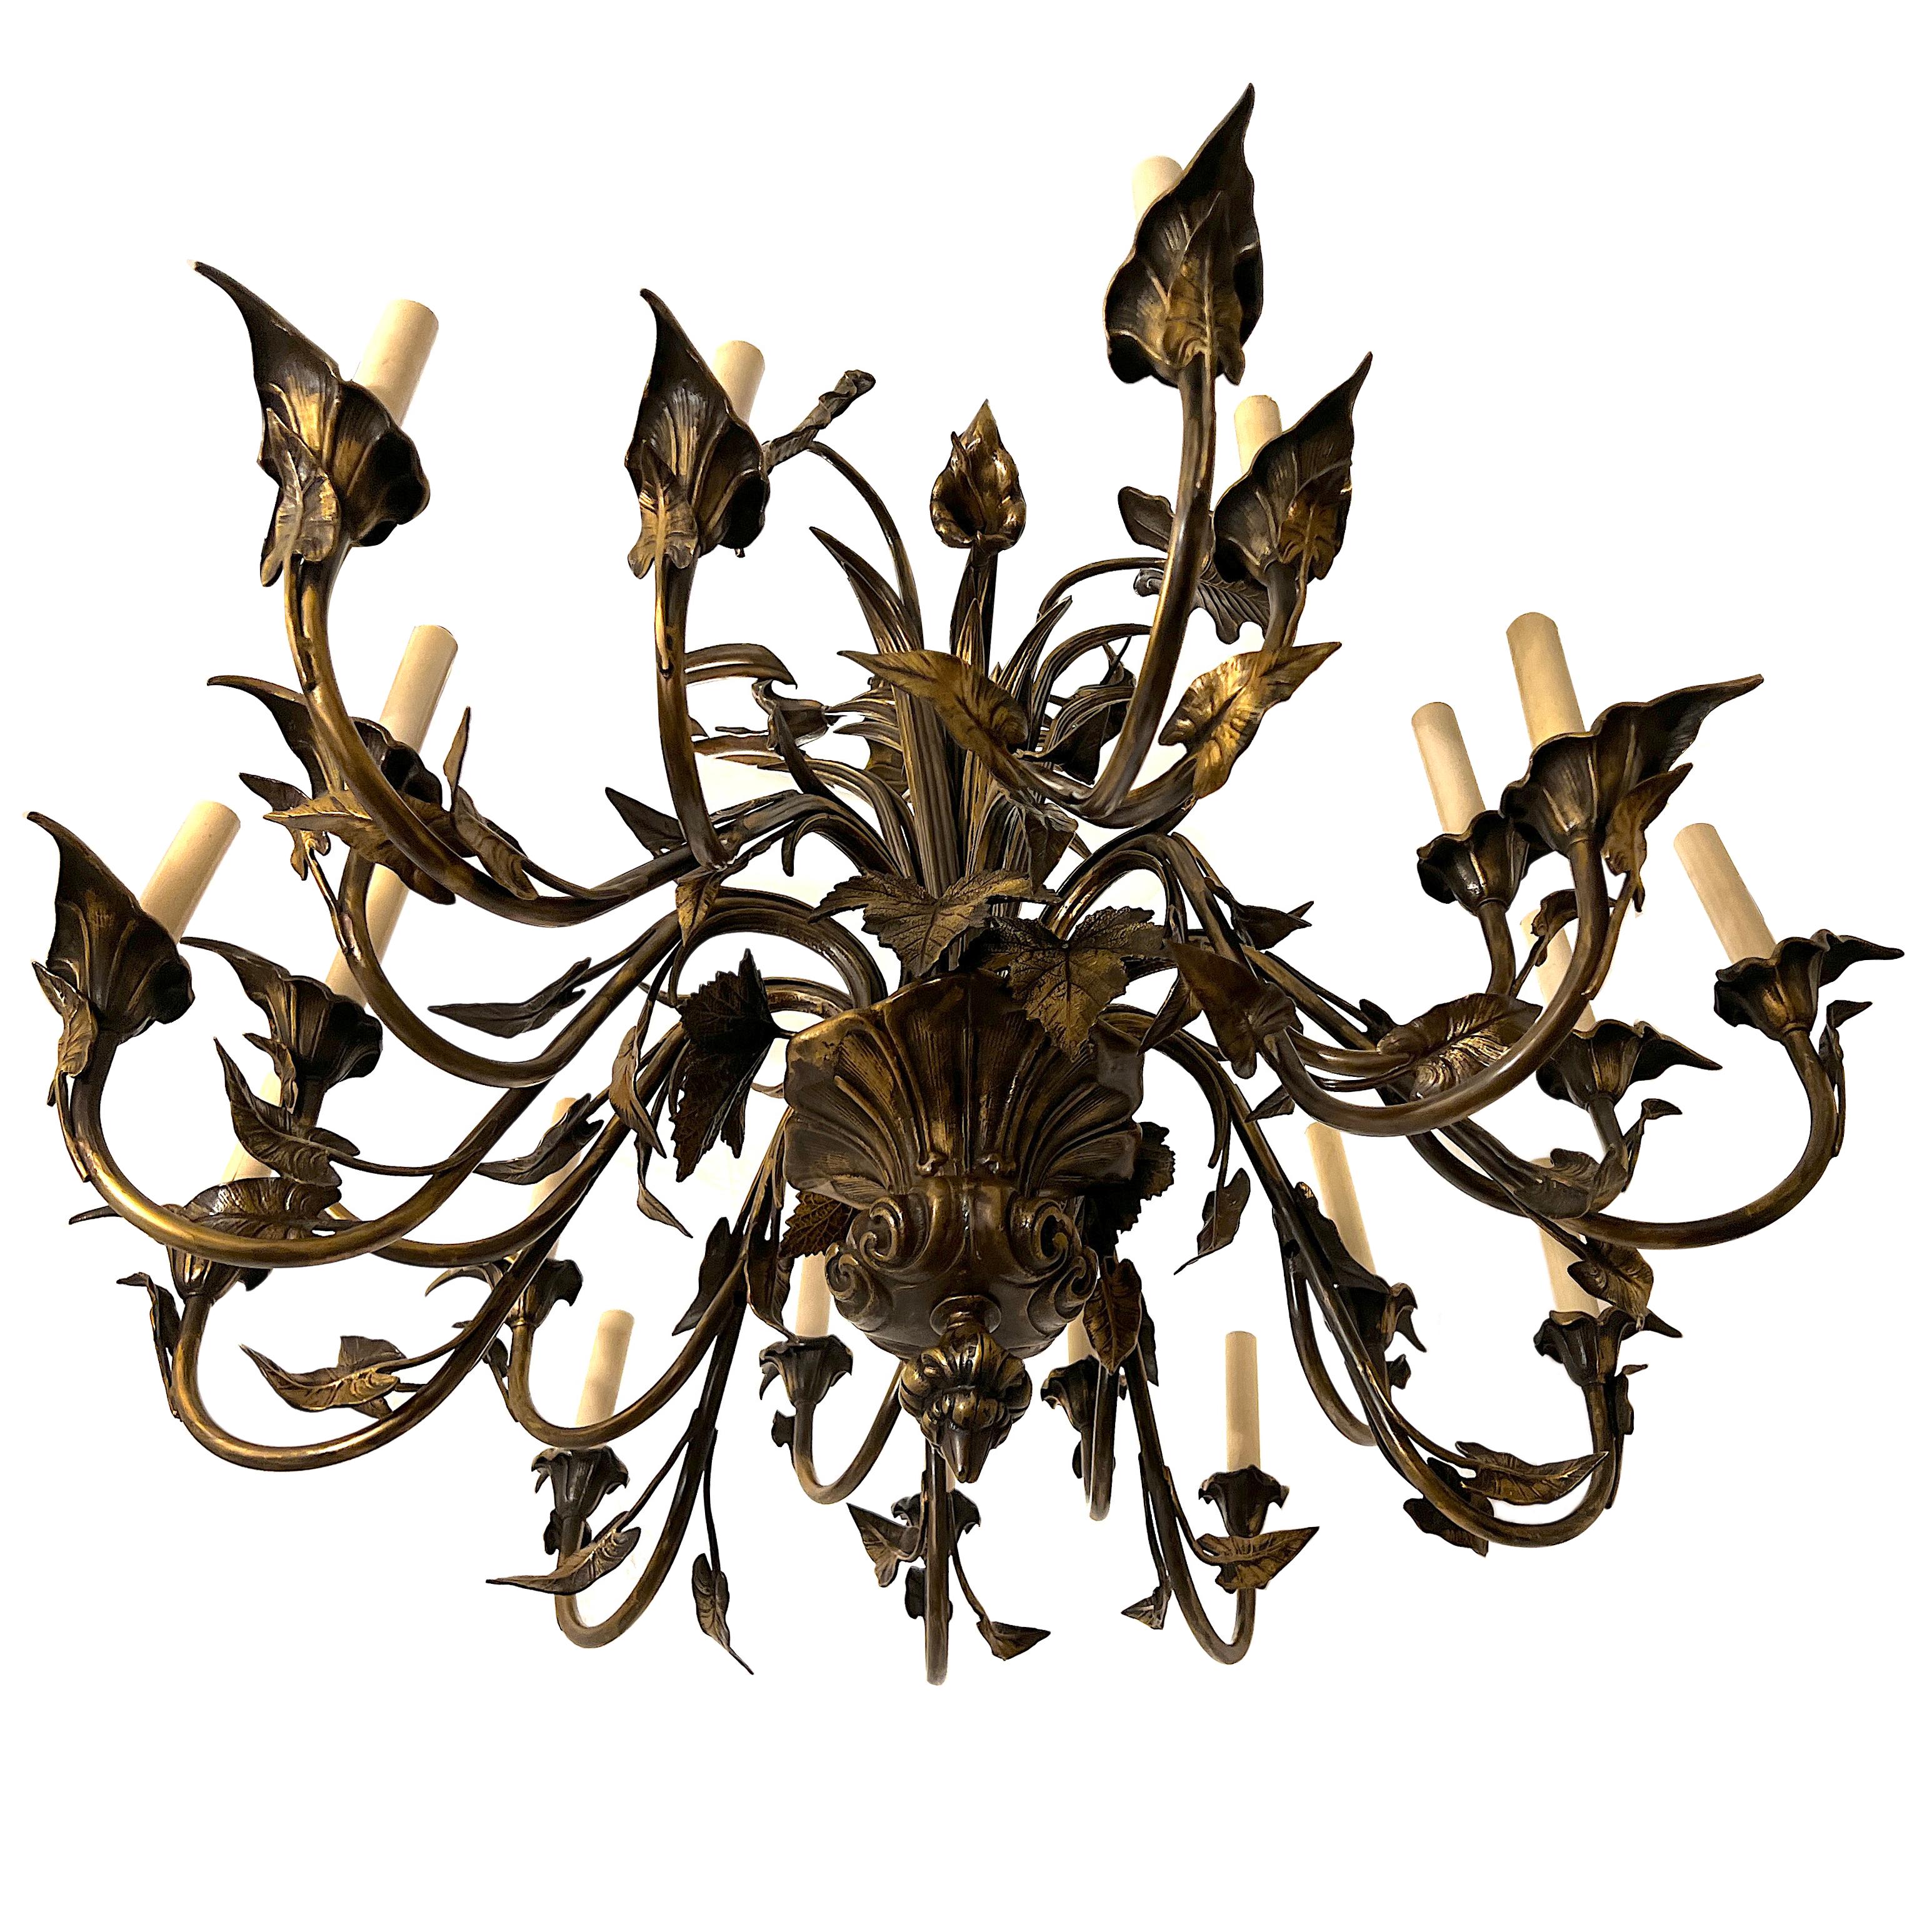 A  circa 1920s French calla lily design chandelier with 20 lights and with original patina. Cast bronze.

Measurements:
30 min. drop.
38